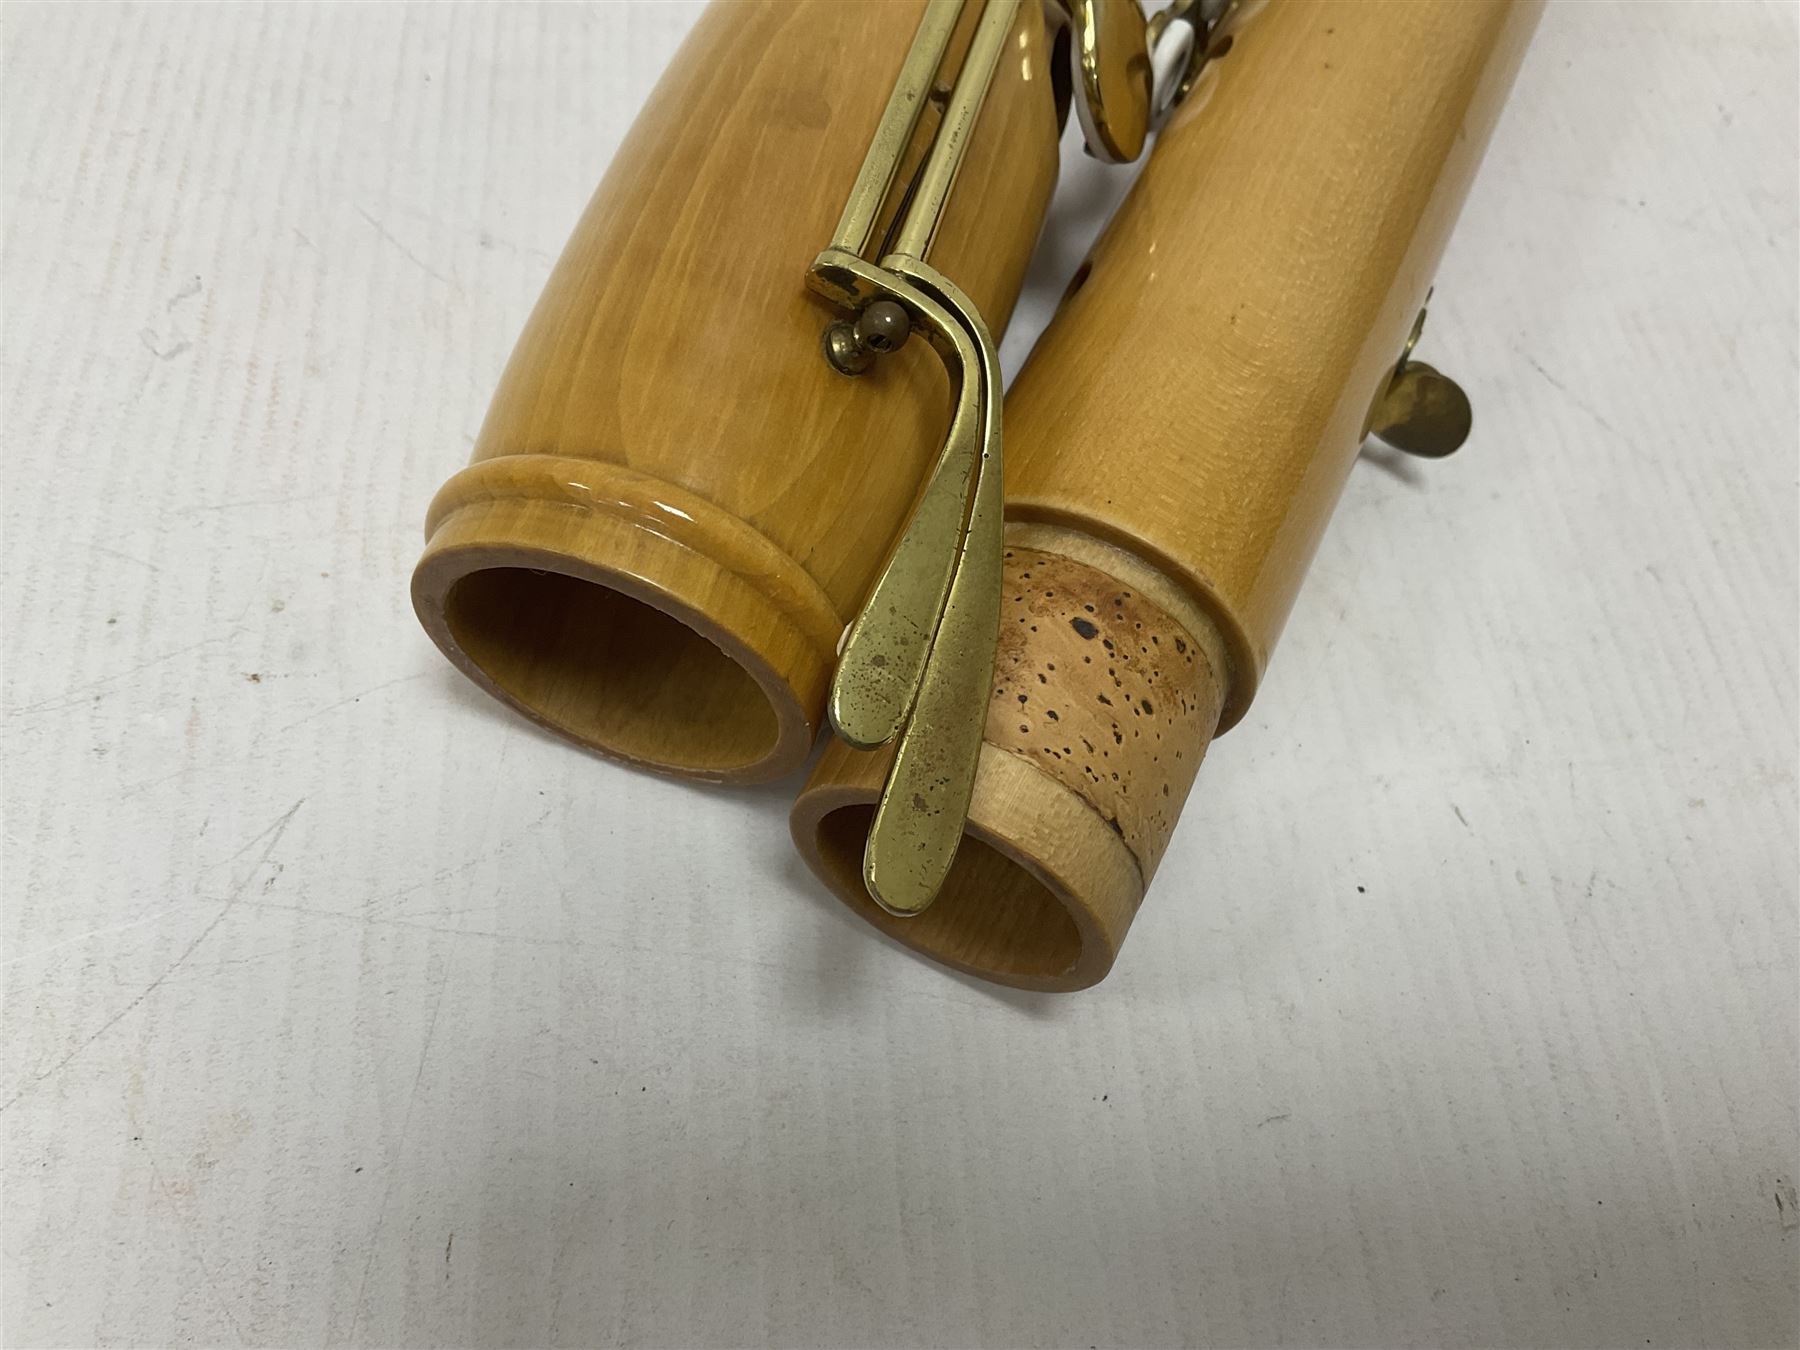 Wooden bass recorder - Image 13 of 14